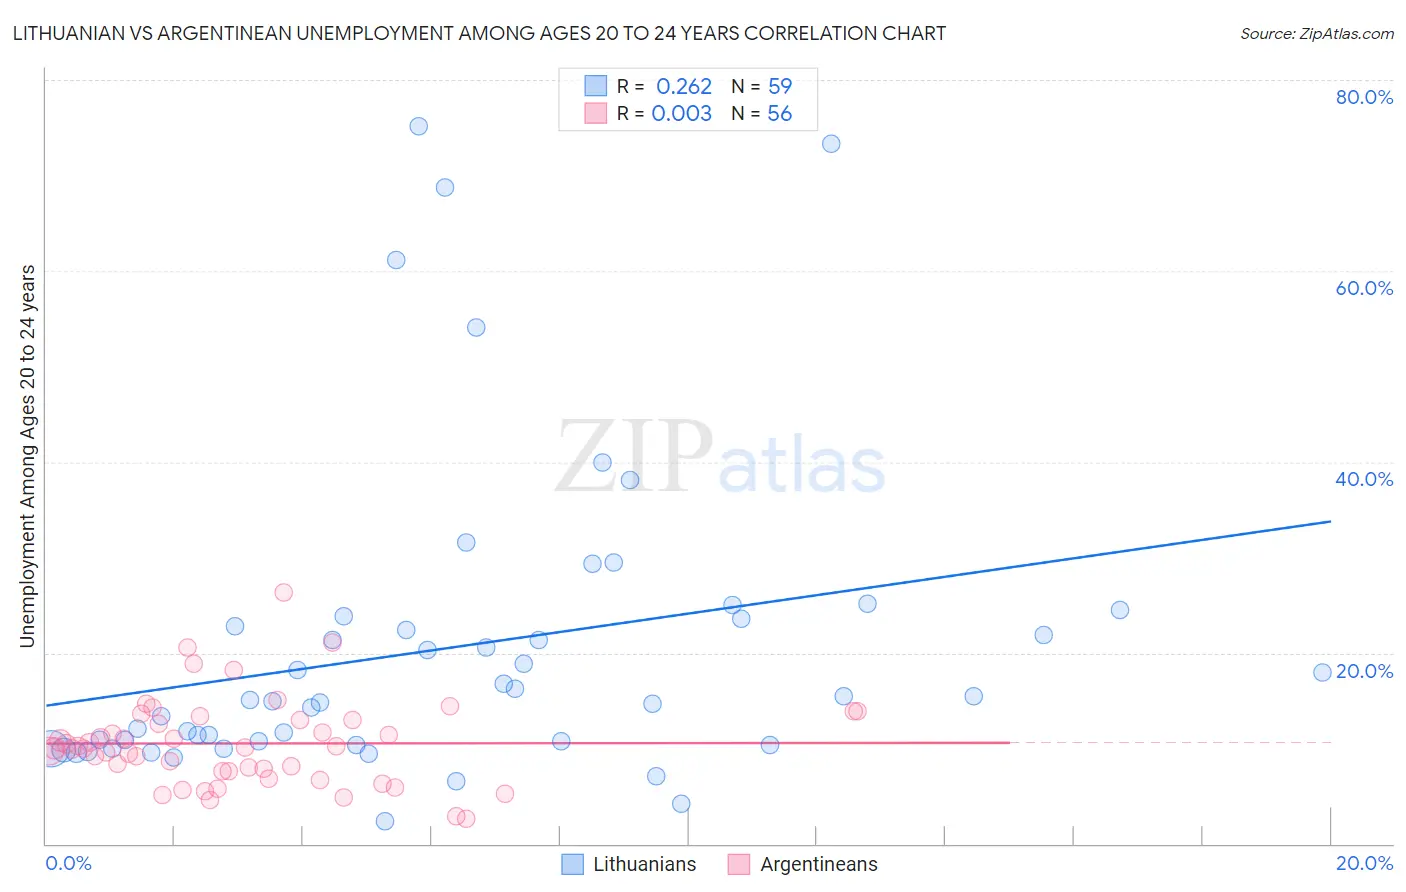 Lithuanian vs Argentinean Unemployment Among Ages 20 to 24 years